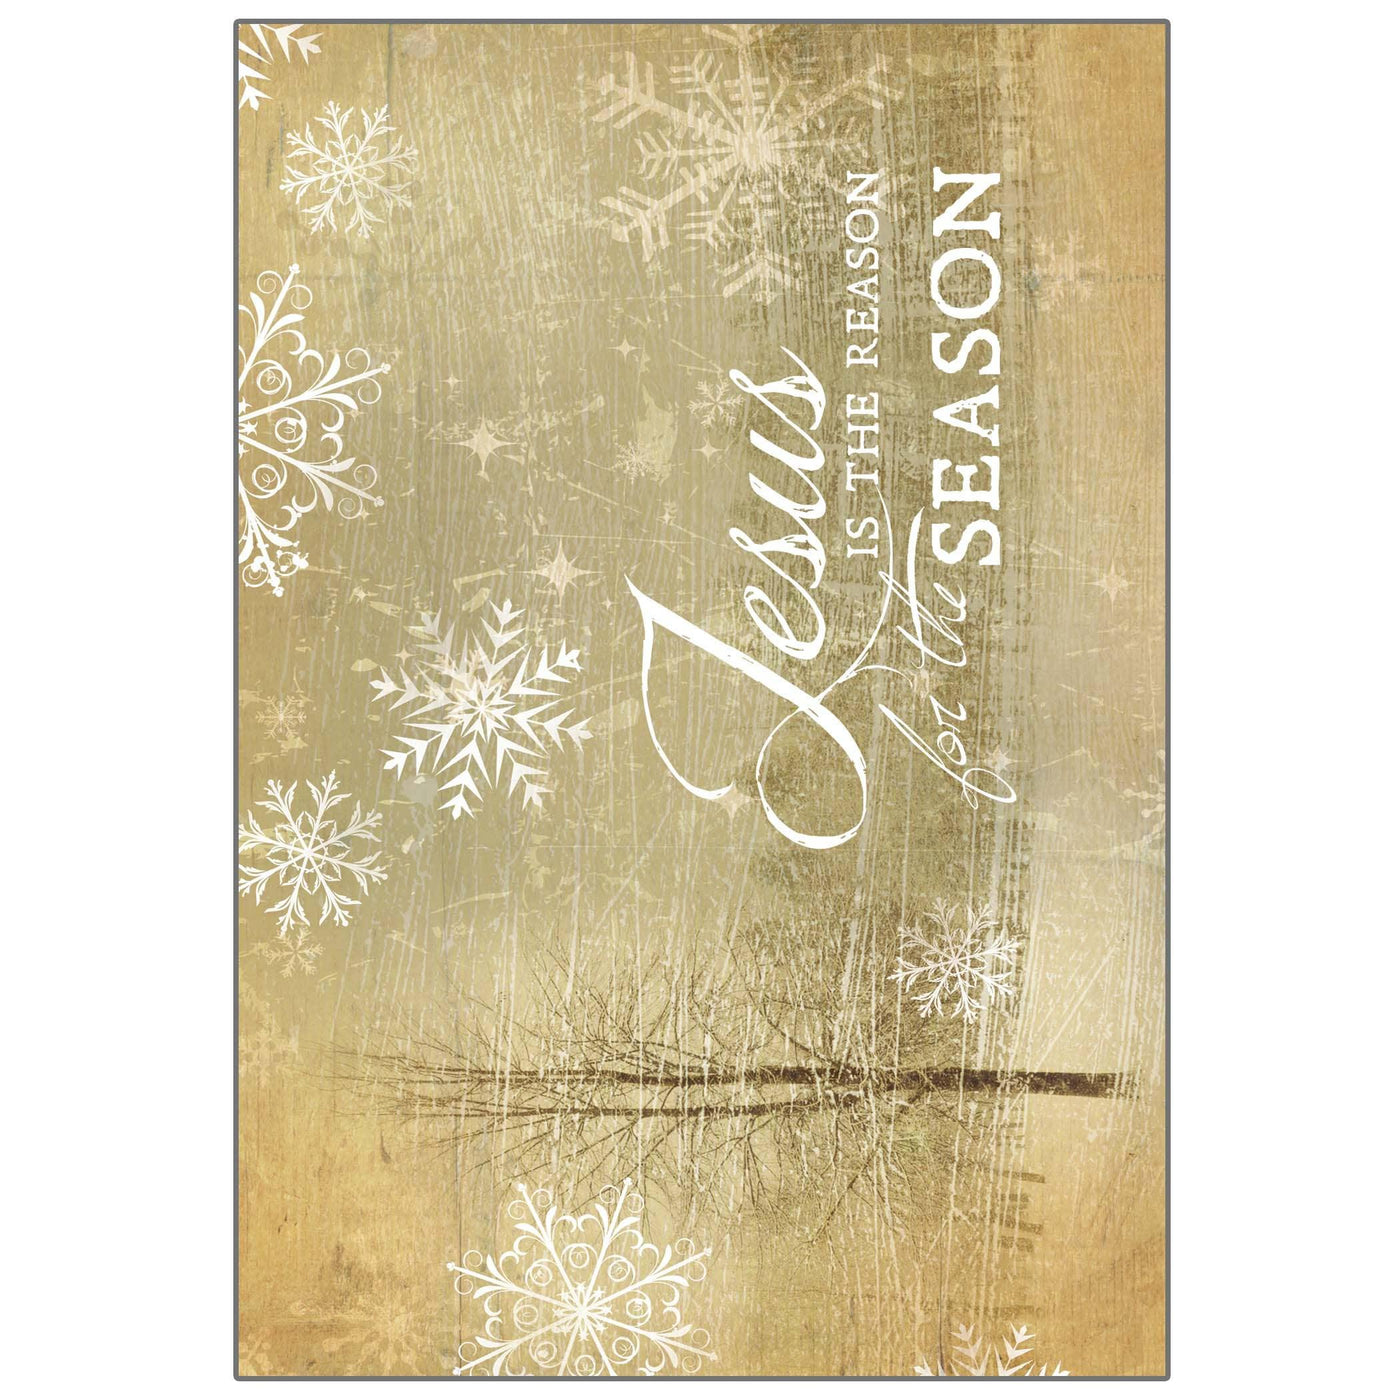 Jesus is the Reason Card | Fruit of the Vine Boutique 